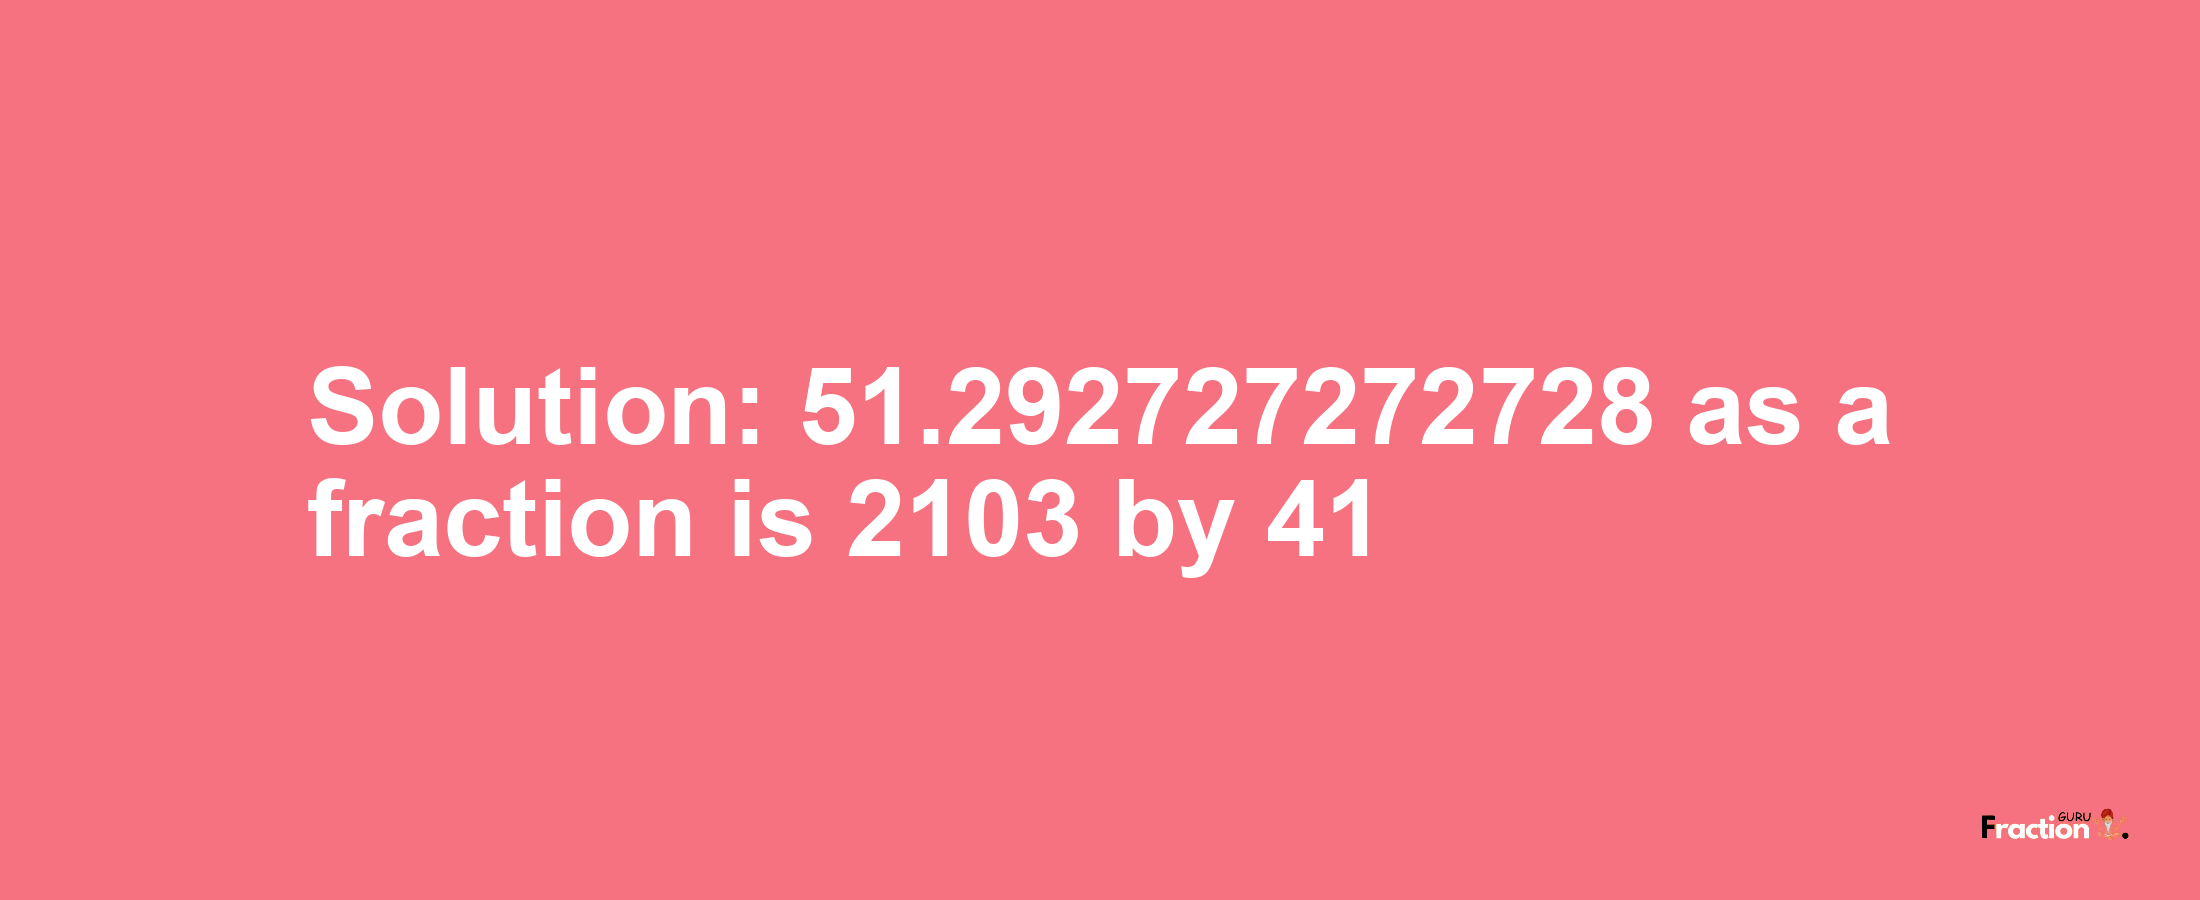 Solution:51.292727272728 as a fraction is 2103/41